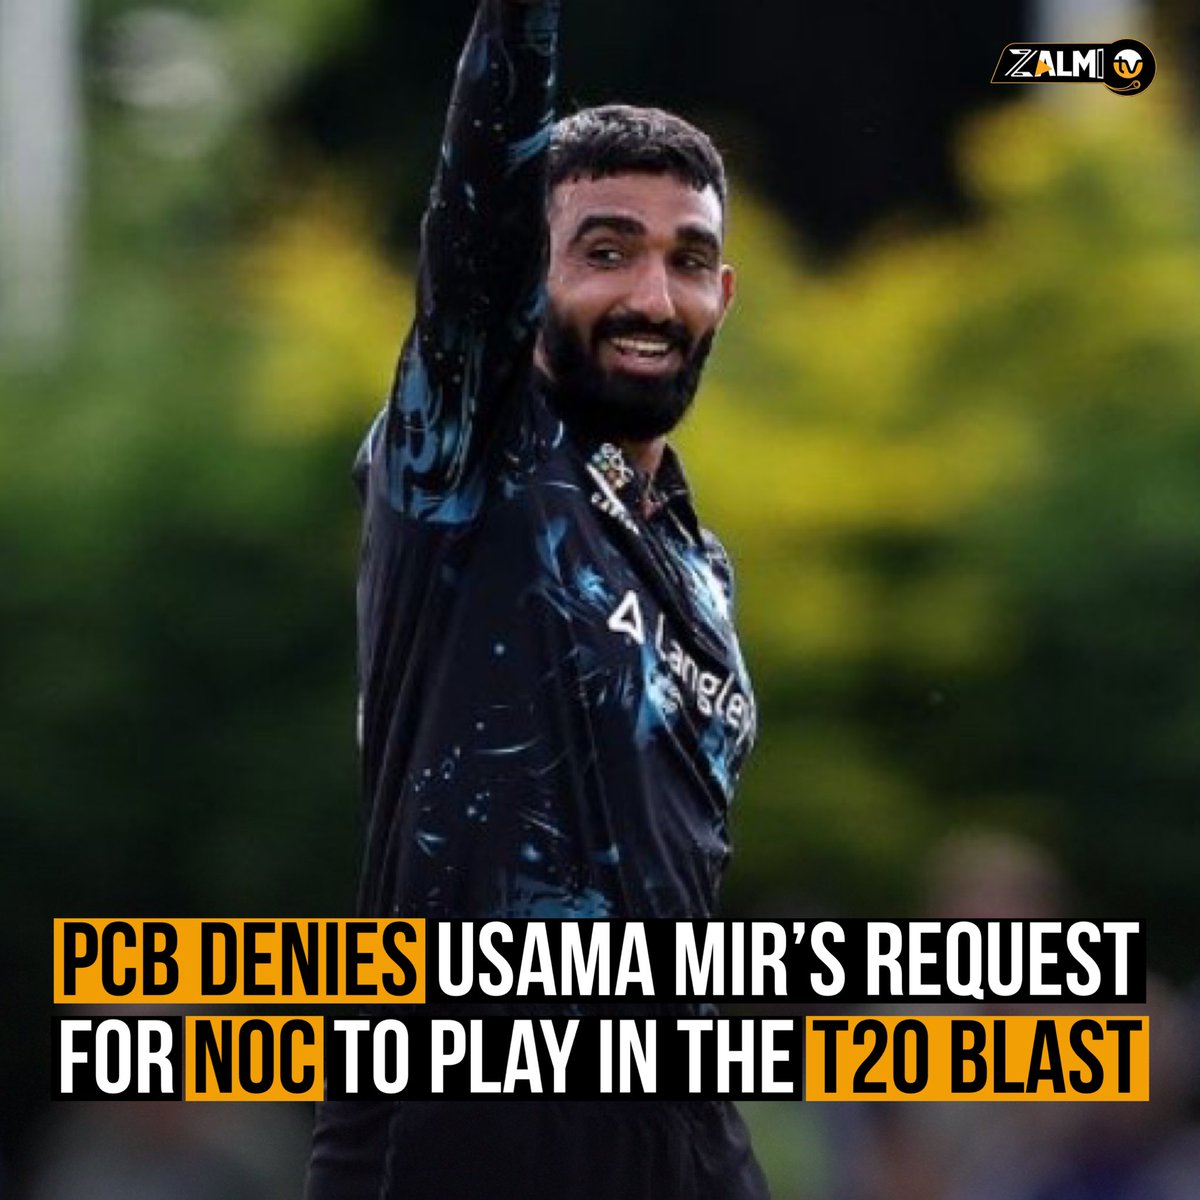 Usama Mir won't play in this year's T20 Blast as the PCB didn't issue him a No-Objection Certificate. He was slated to represent Worcestershire Rapids but was excluded from Pakistan's T20 World Cup squad.

#UsamaMir #PakistanCricket #ZalmiTV